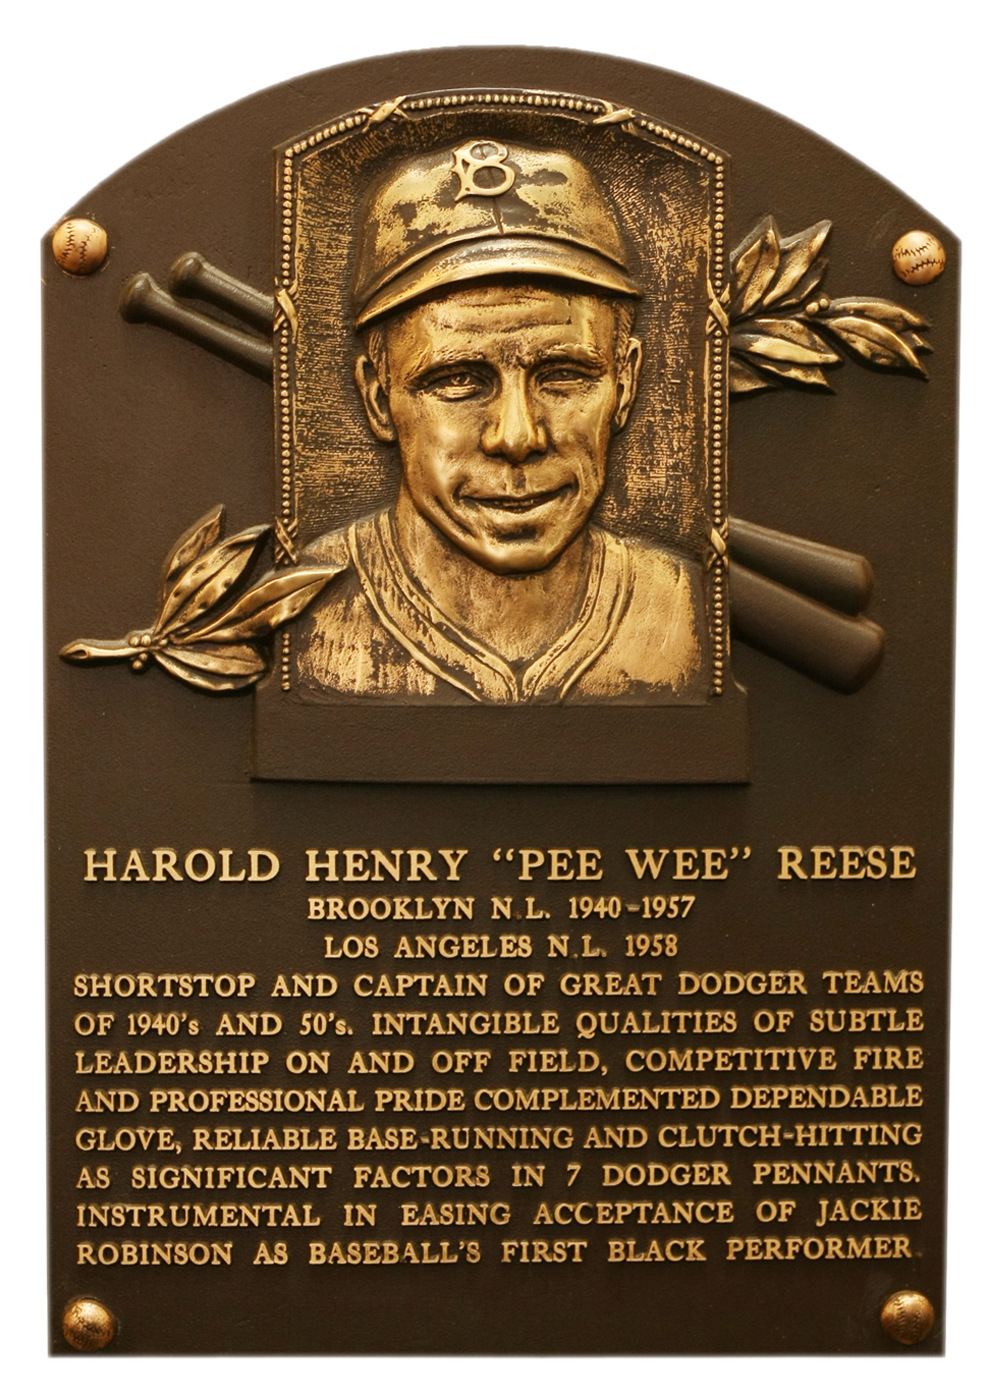 Pee Wee Reese Hall of Fame plaque